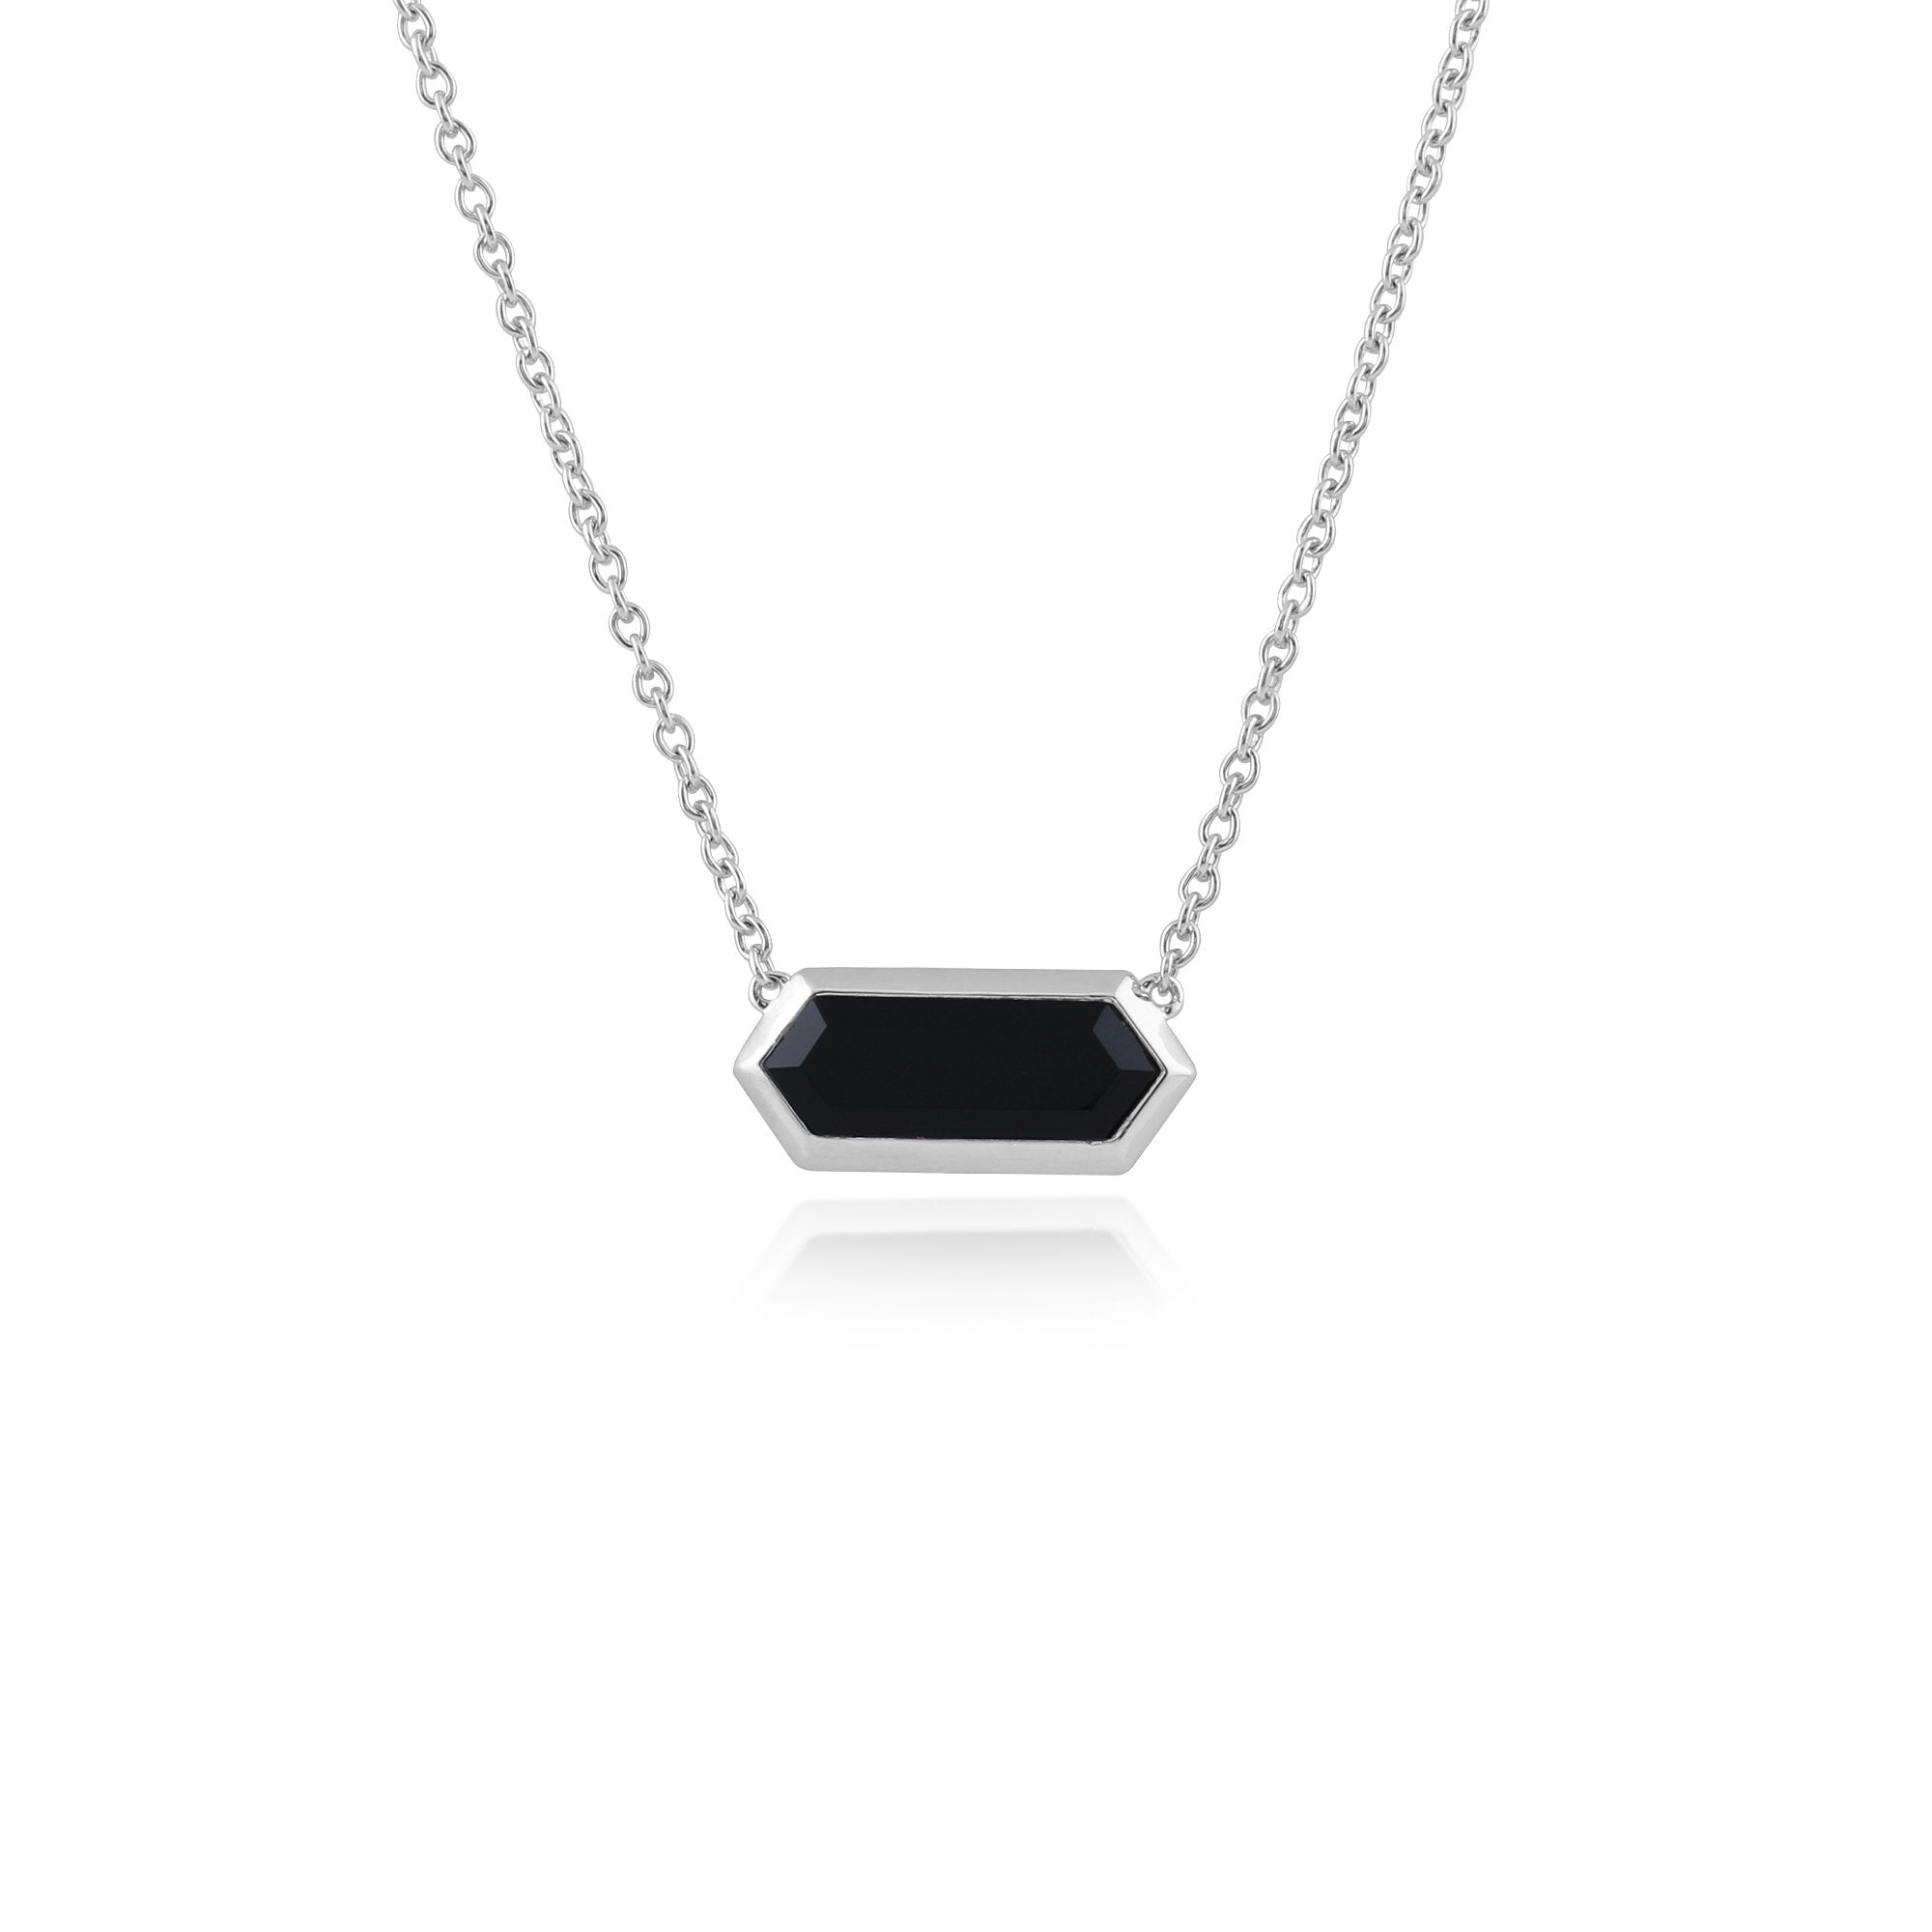 Geometric Hexagon Black Onyx Prism Necklace in 925 Sterling Silver